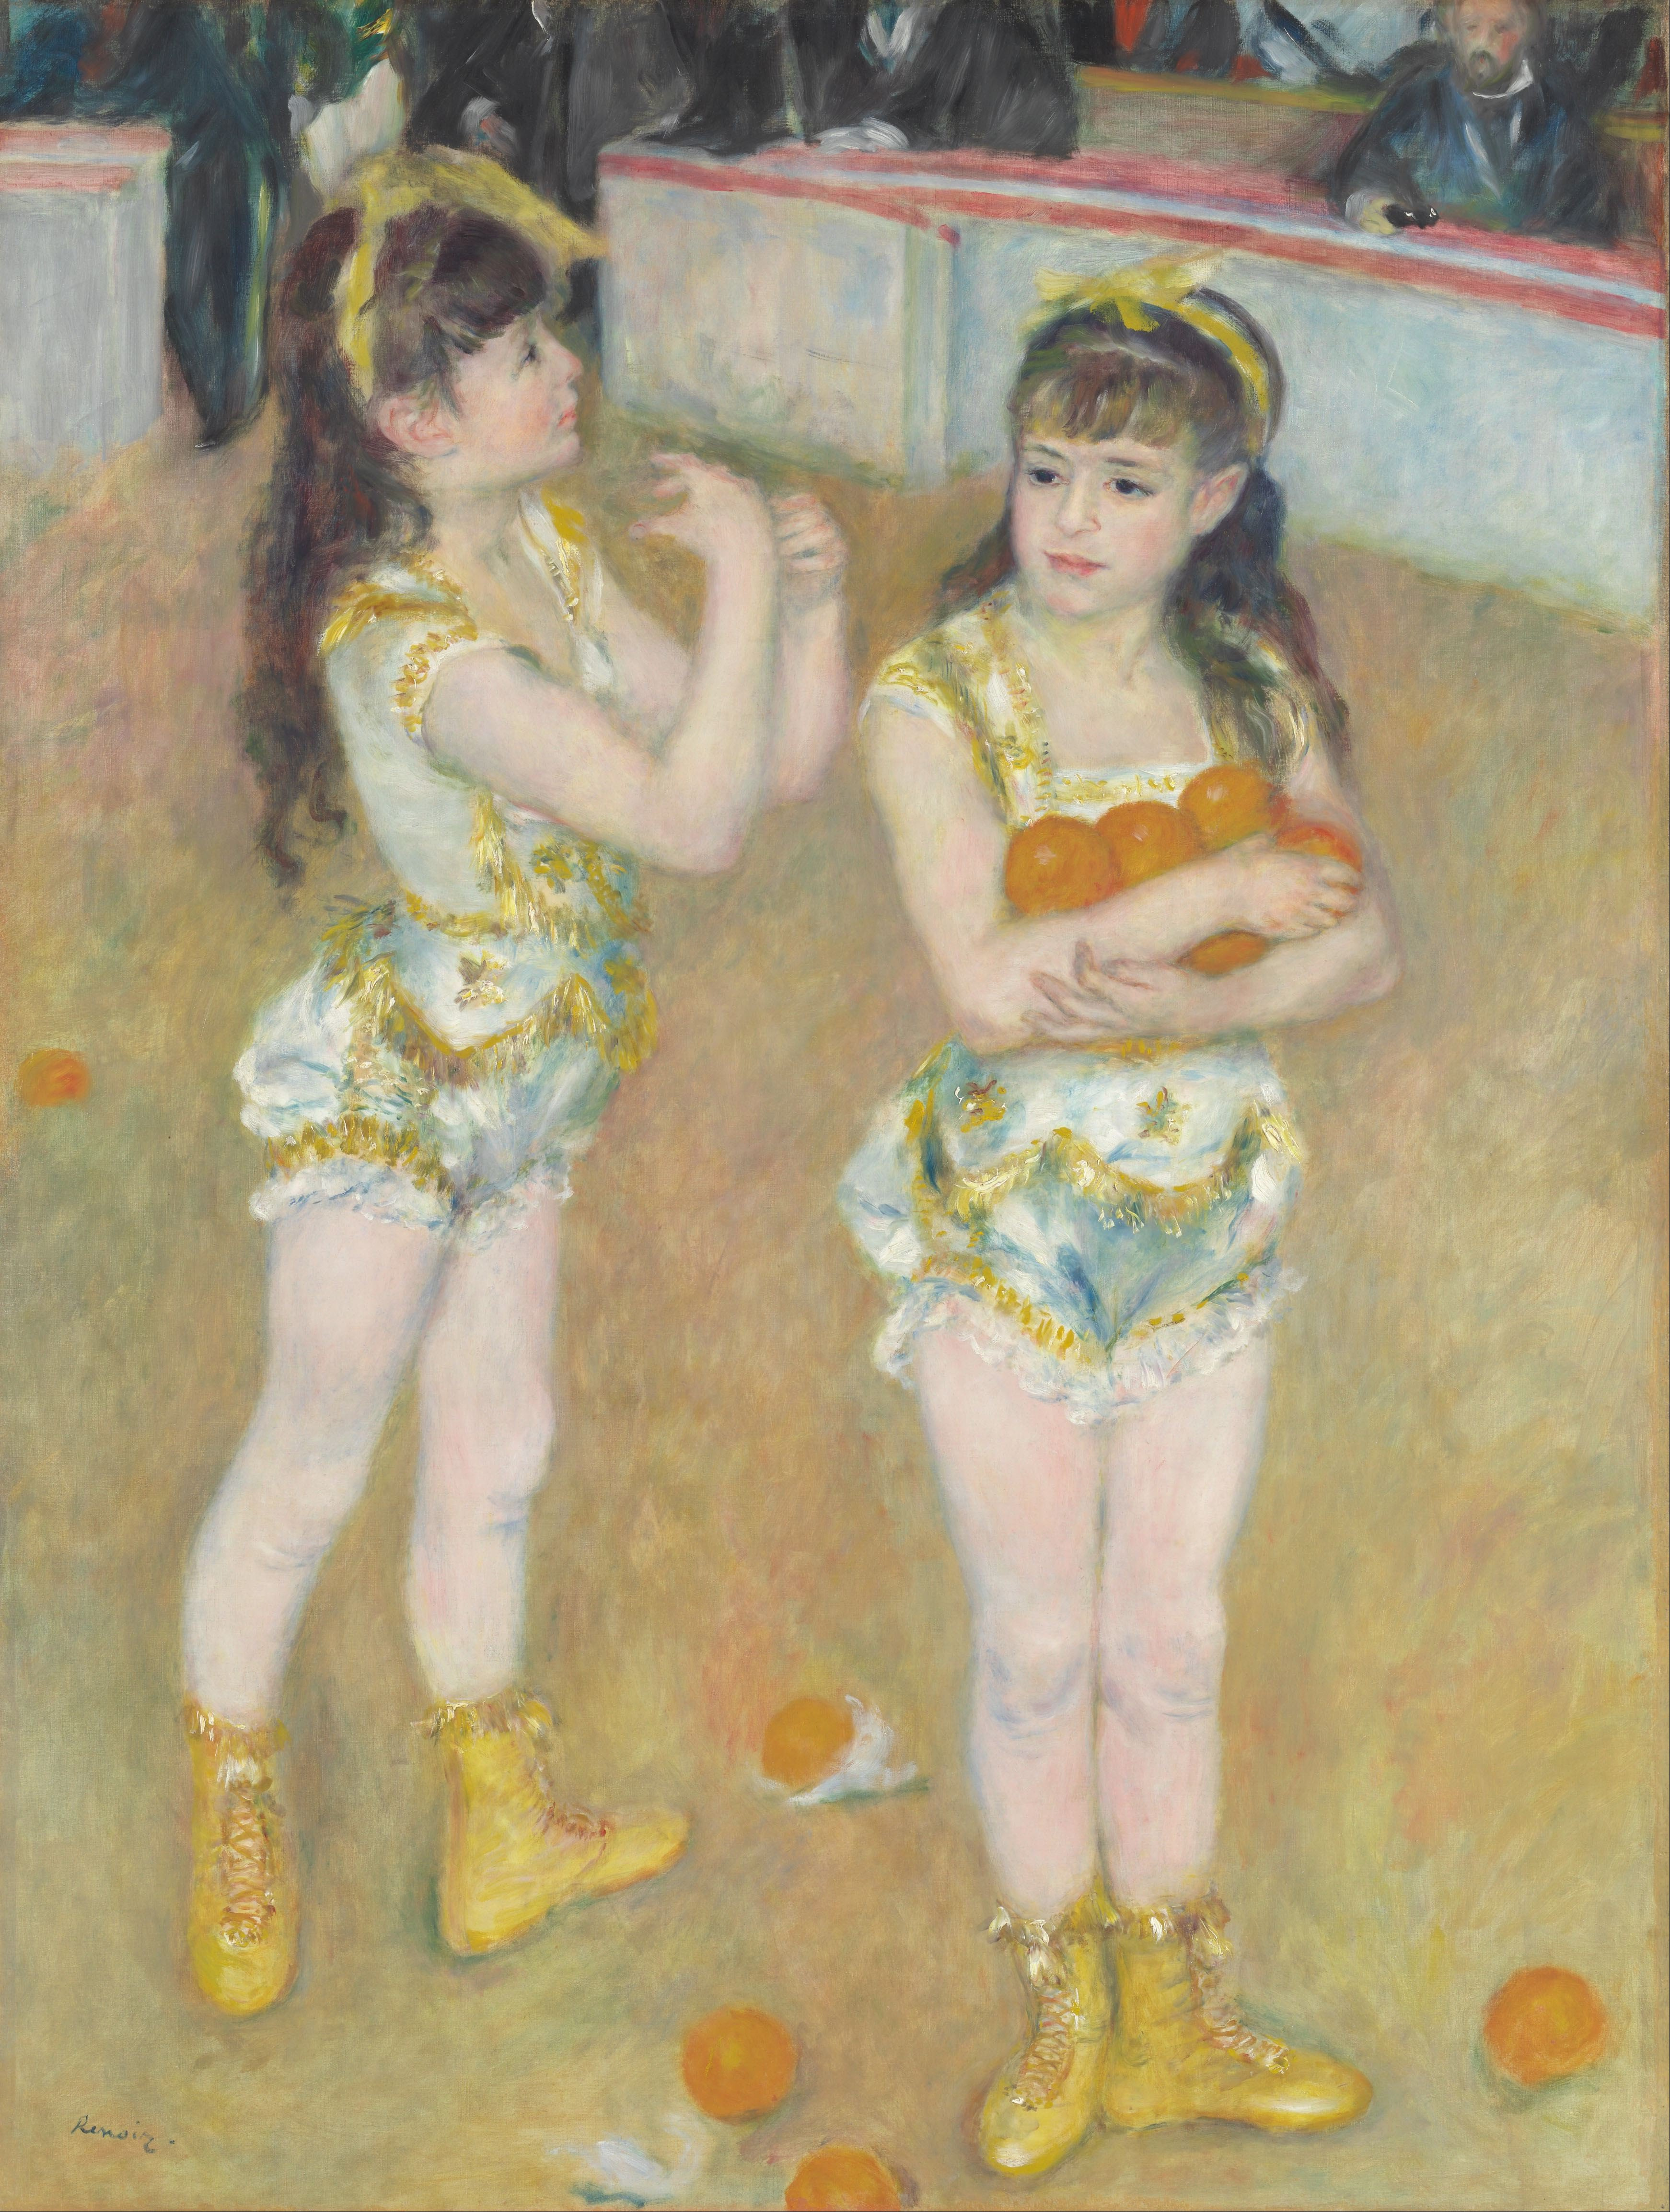 Acrobats at the Cirque Fernando (Francisca and Angelina Wartenberg) by Pierre-Auguste Renoir - 1879 - 131.2 × 99.2 cm Art Institute of Chicago